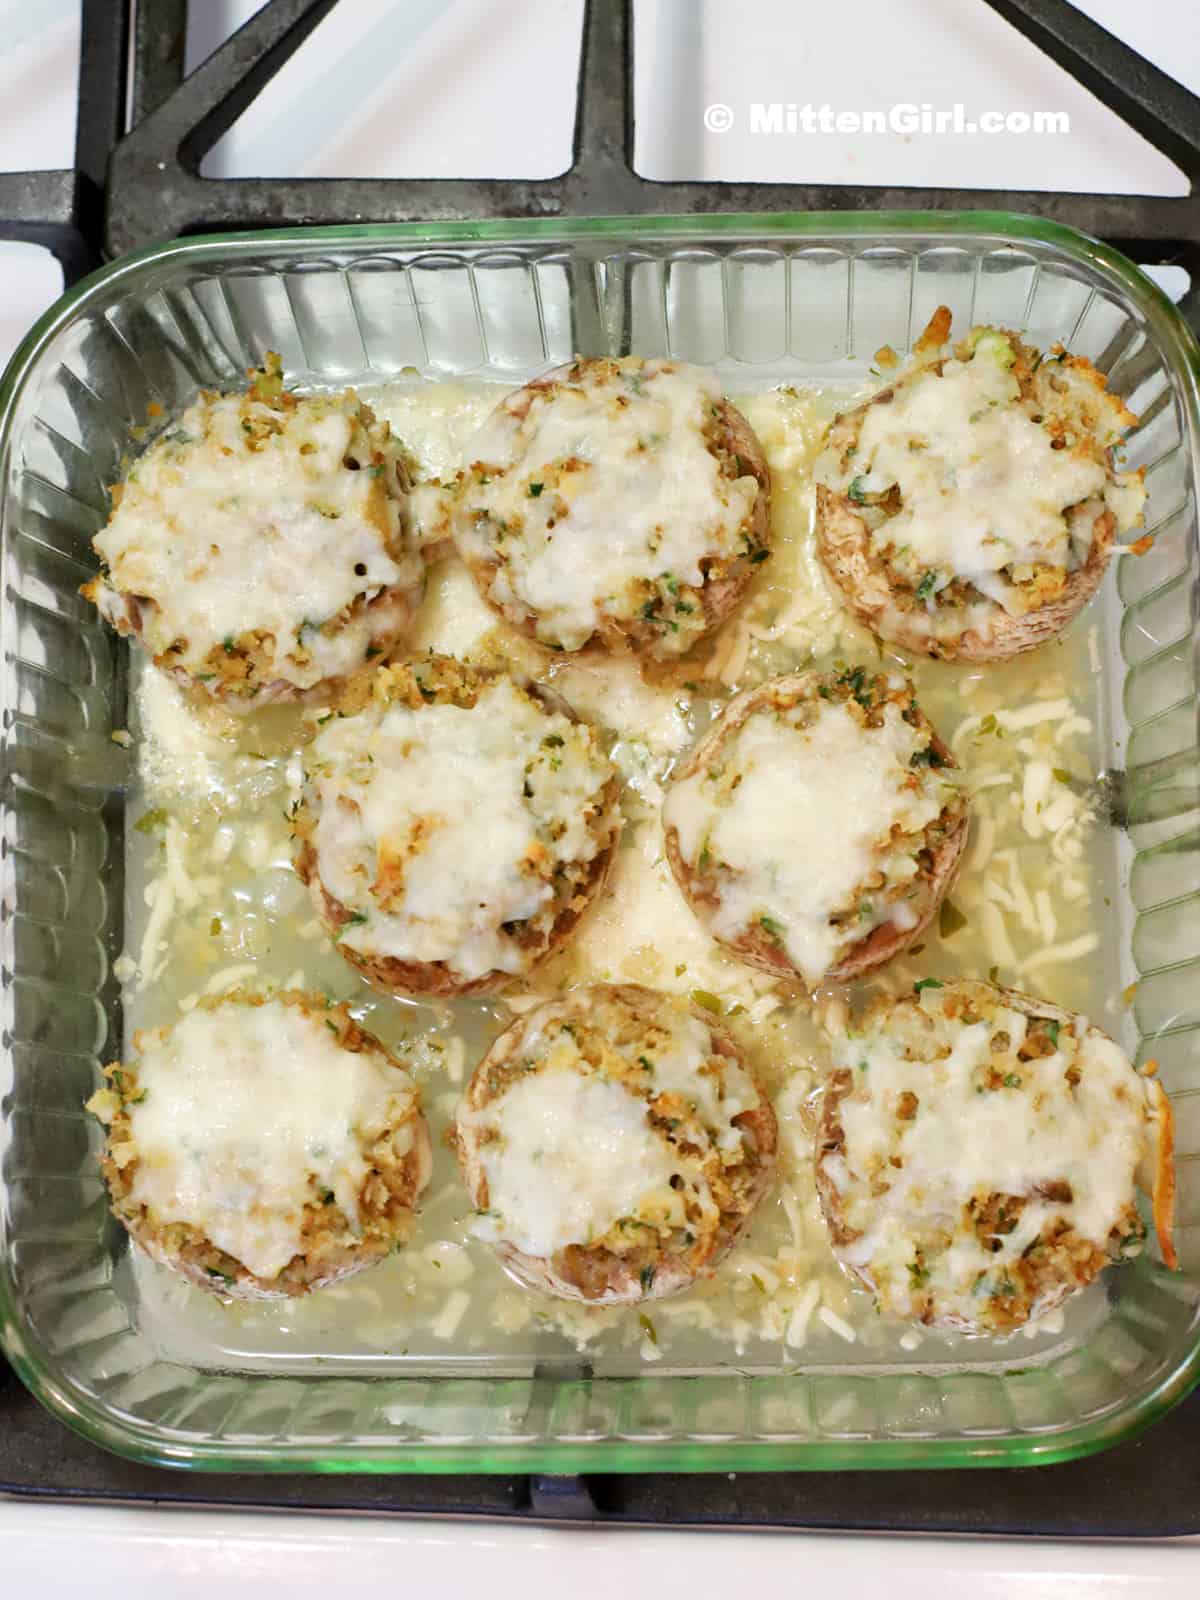 Stuffed mushrooms covered with cheese, fresh from the oven.